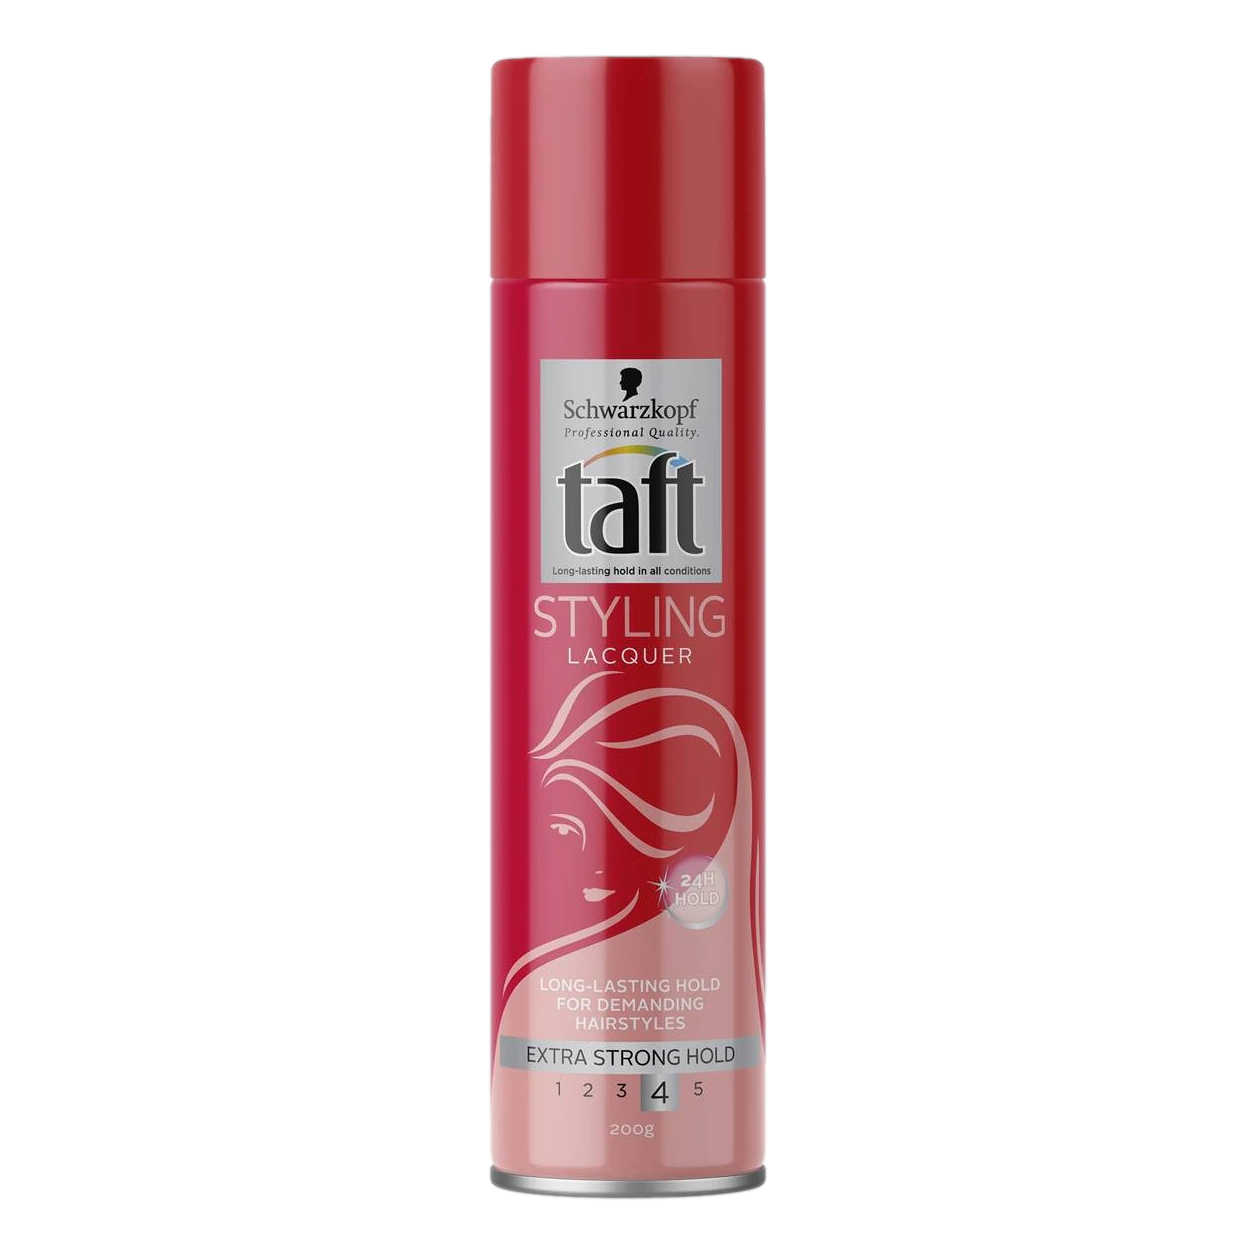 Taft Styling Lacquer Extra Strong Hold 200g